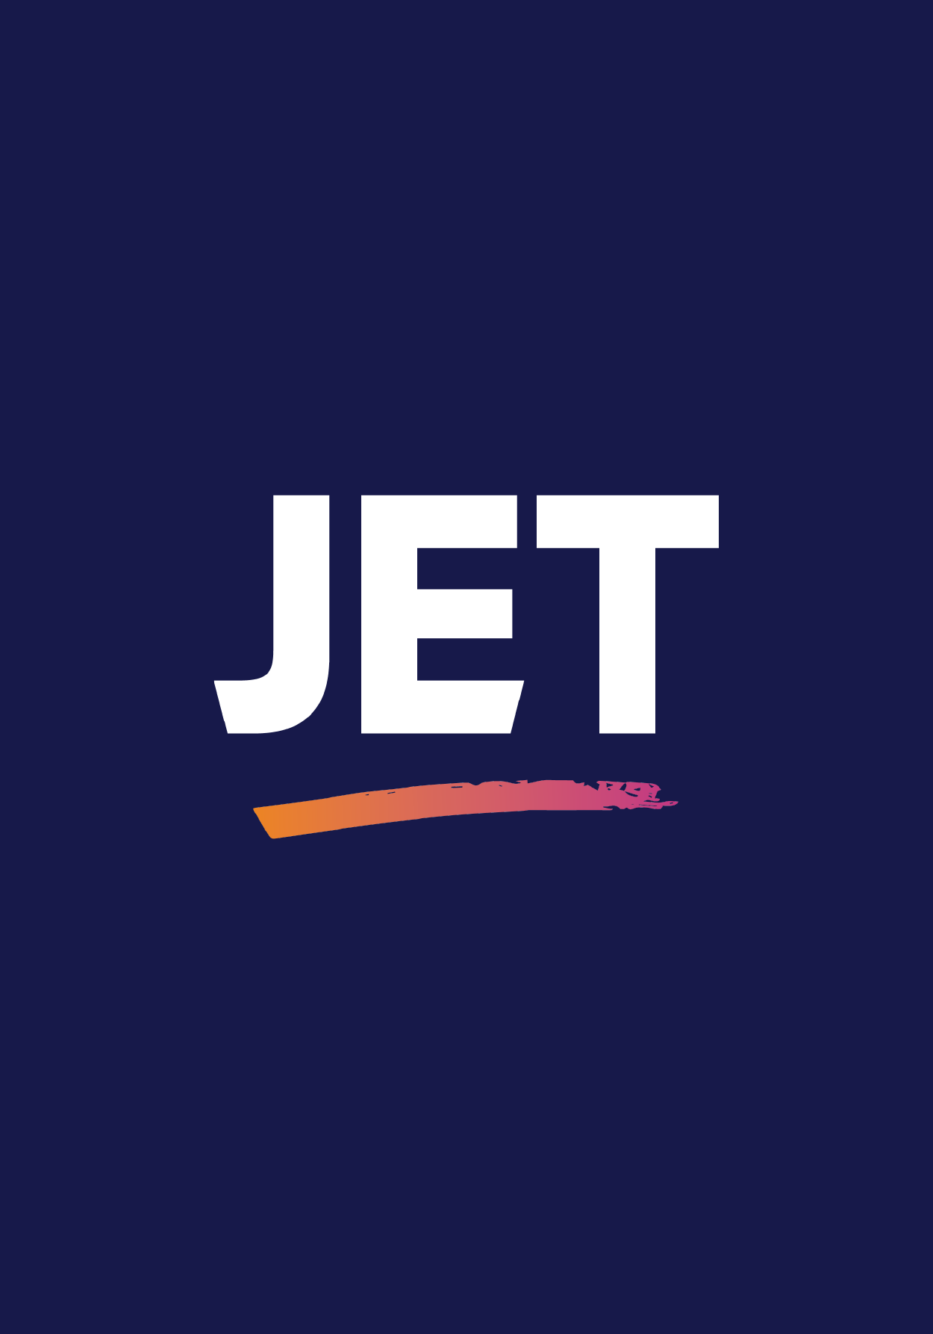 About JET Delivers Light